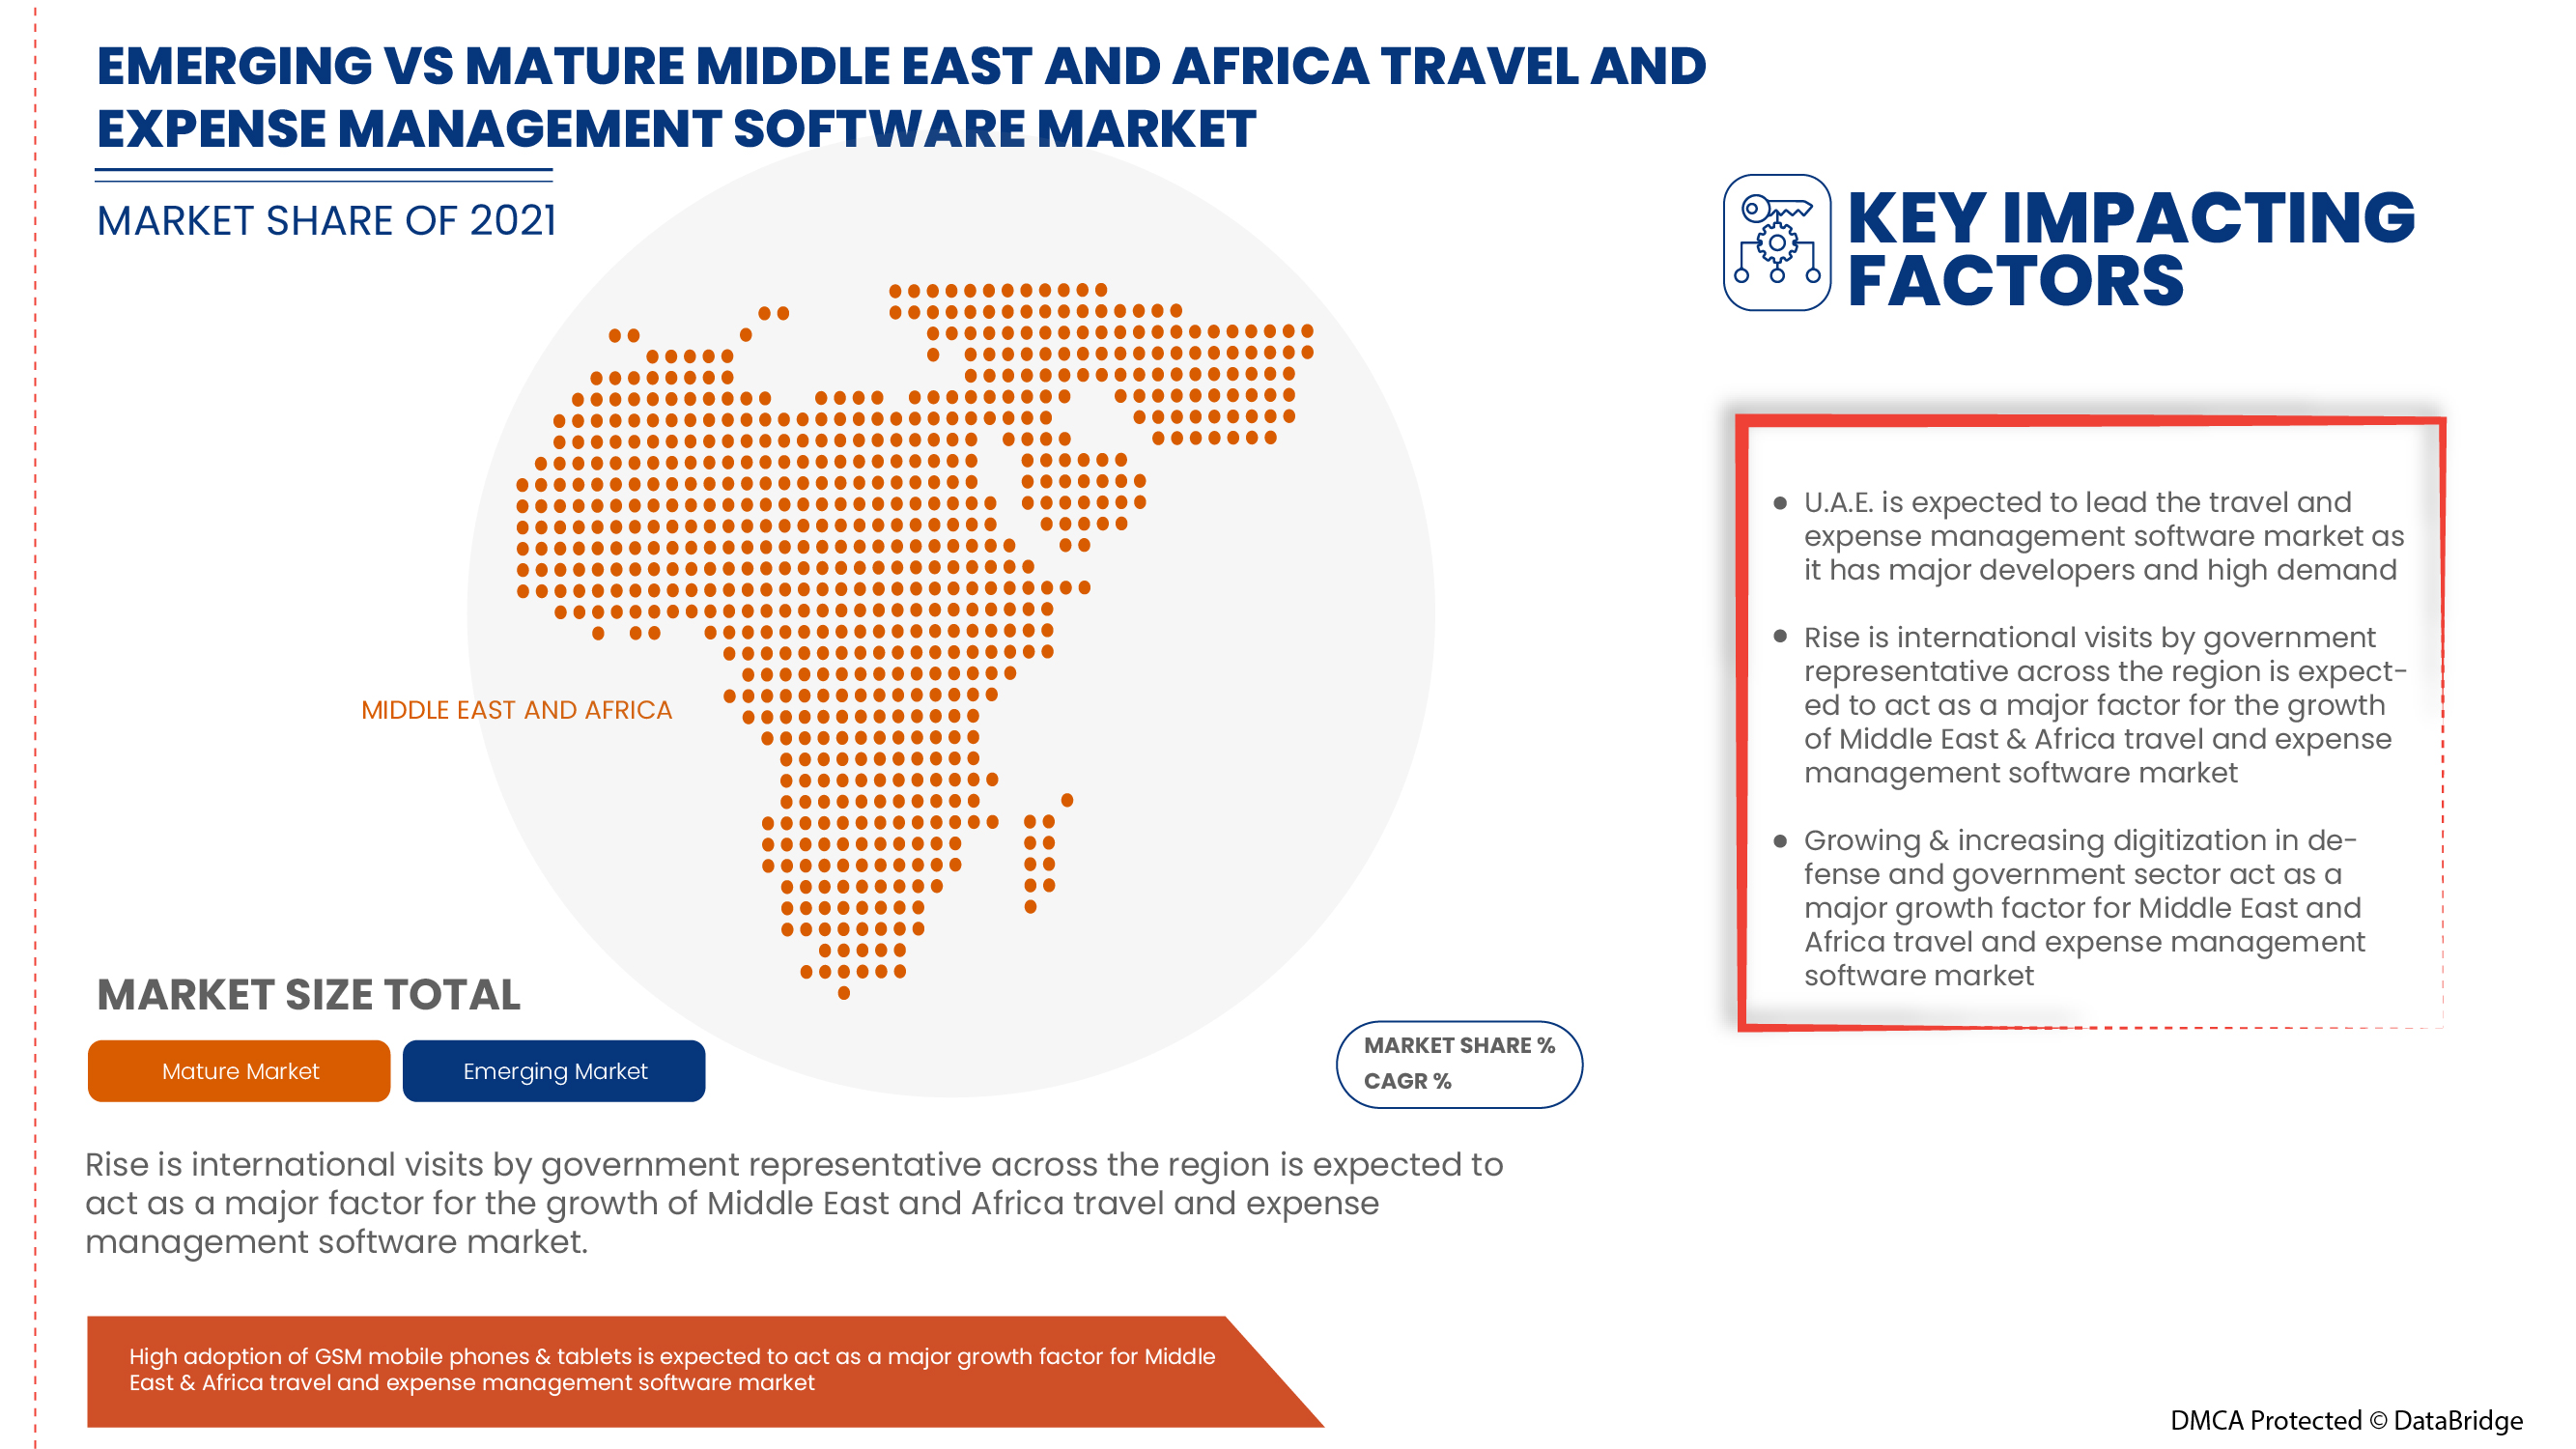 Middle East and Africa Travel and Expense Management Software Market